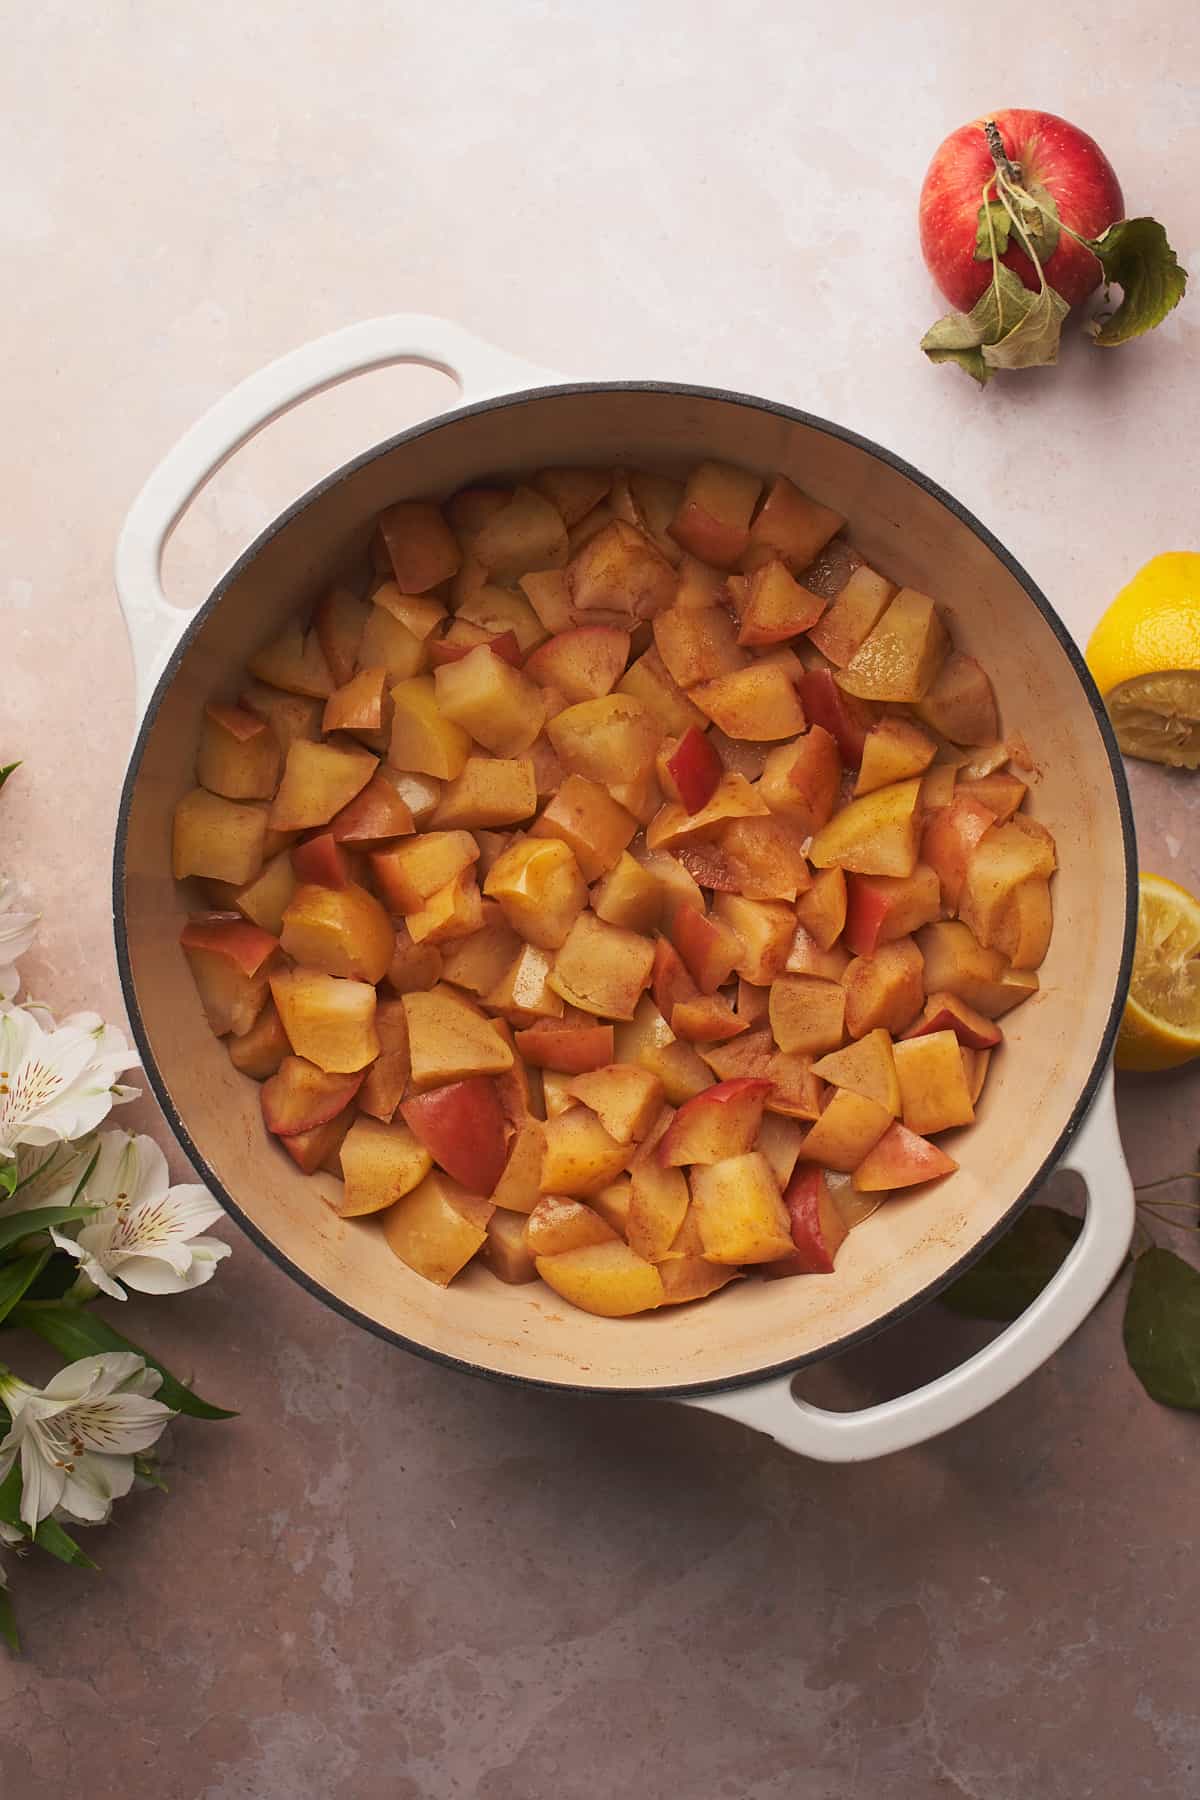 softened apples in a dutcb oven surrounded by white flowers and spent lemons.